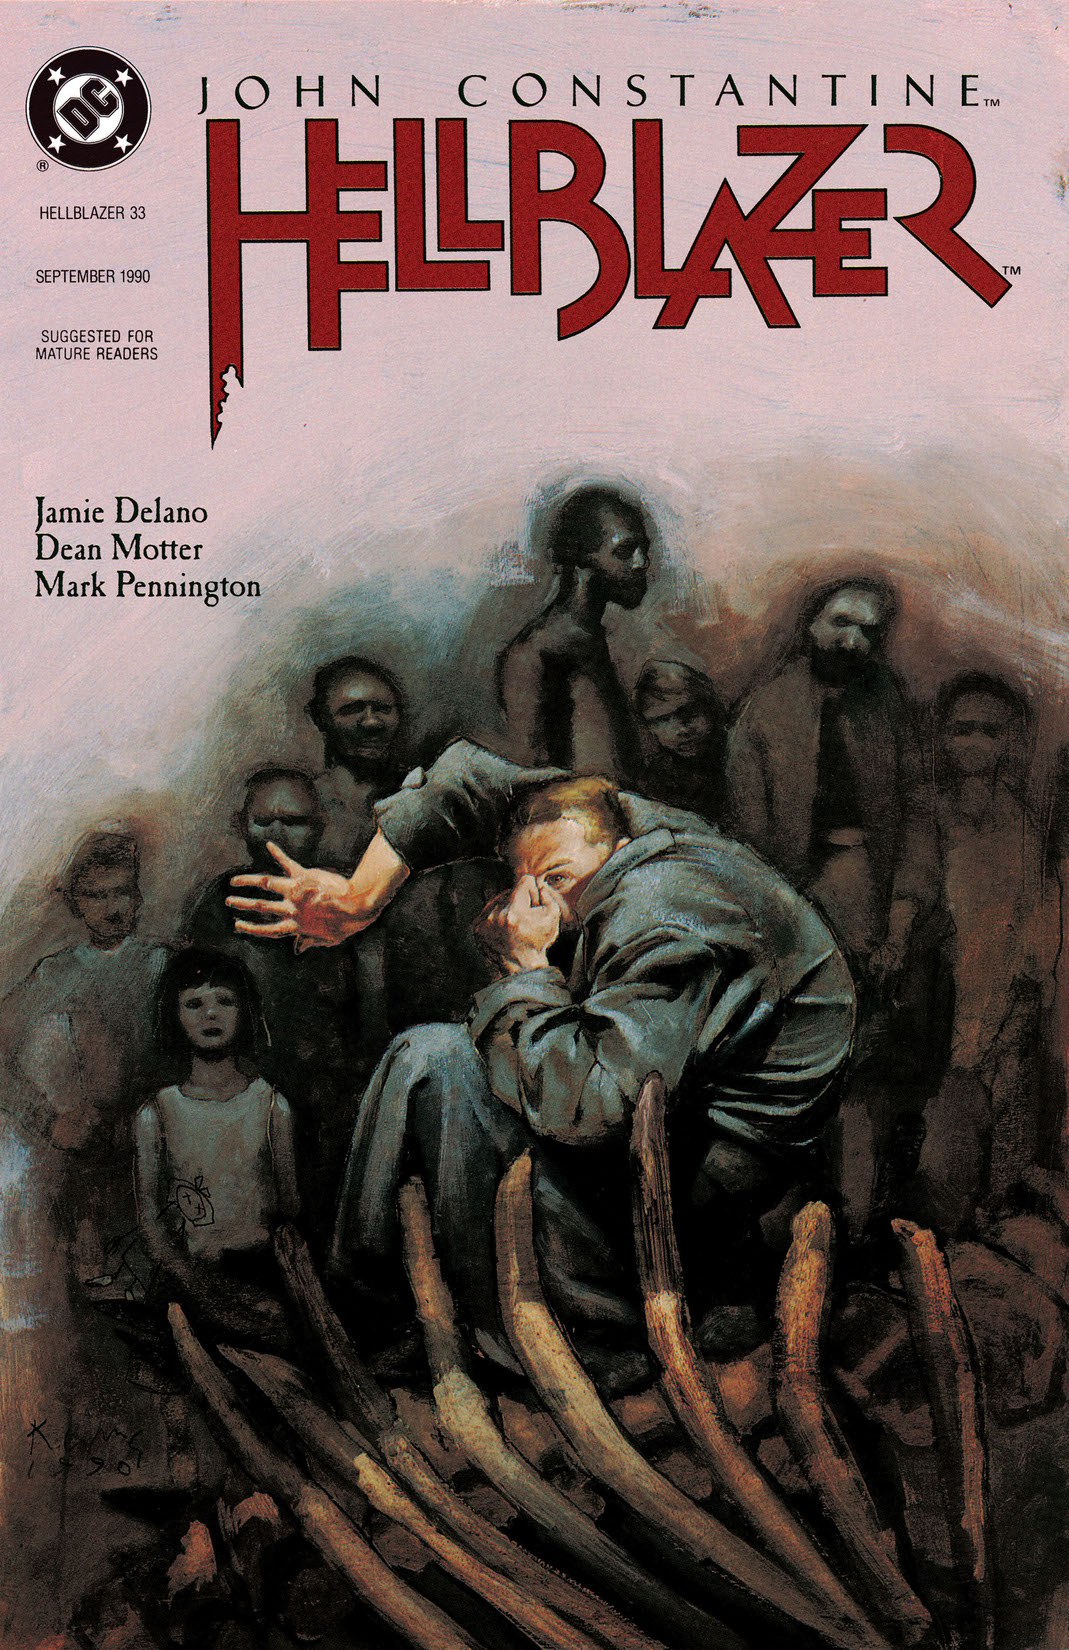 Hellblazer #33 preview images